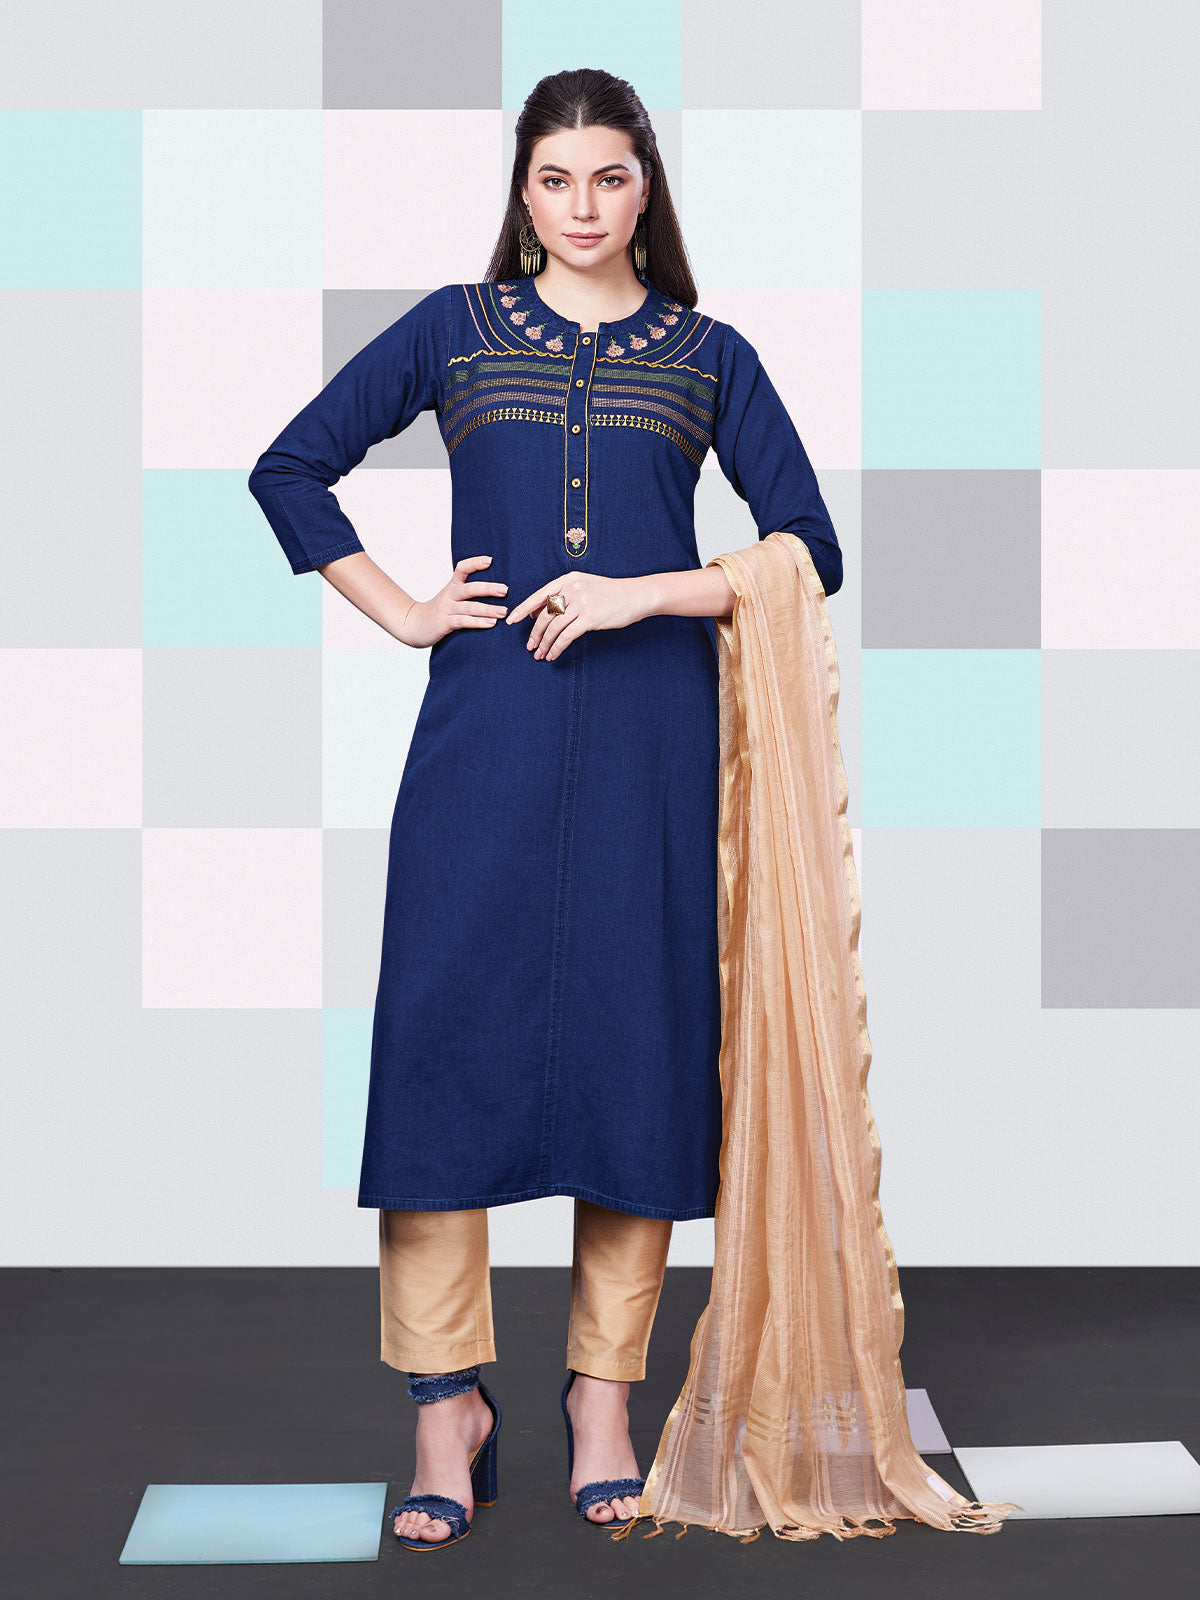 Buy Denim Womens Kurtis Online at Low Prices on Snapdeal.com